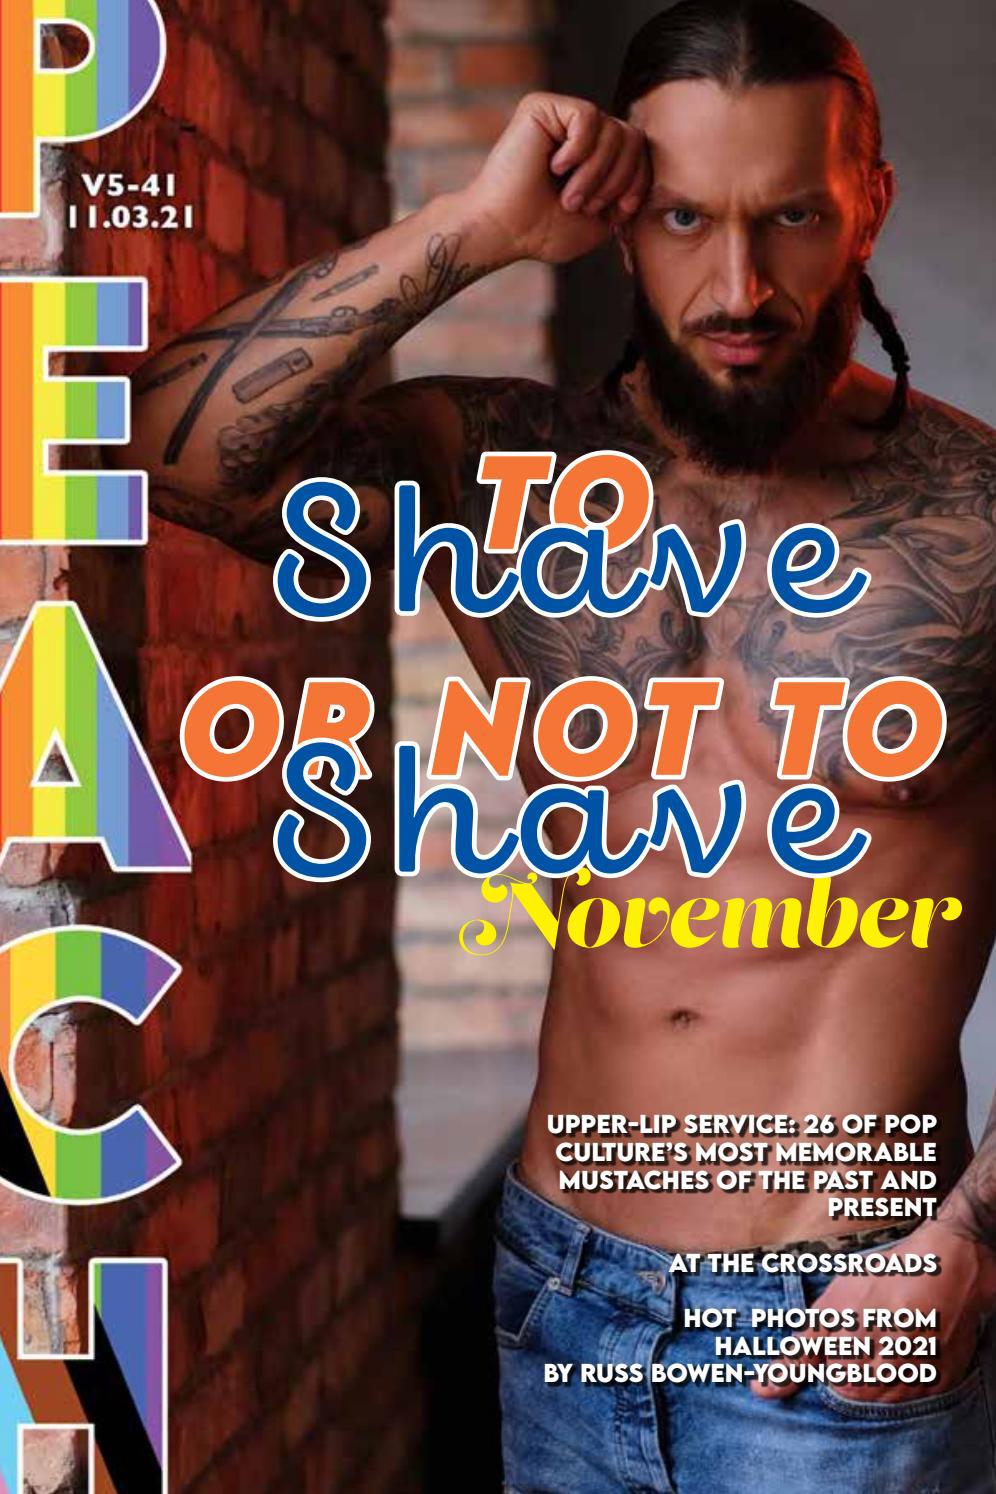 Peach Magazine V5i41 | To Shave or Not To Shave